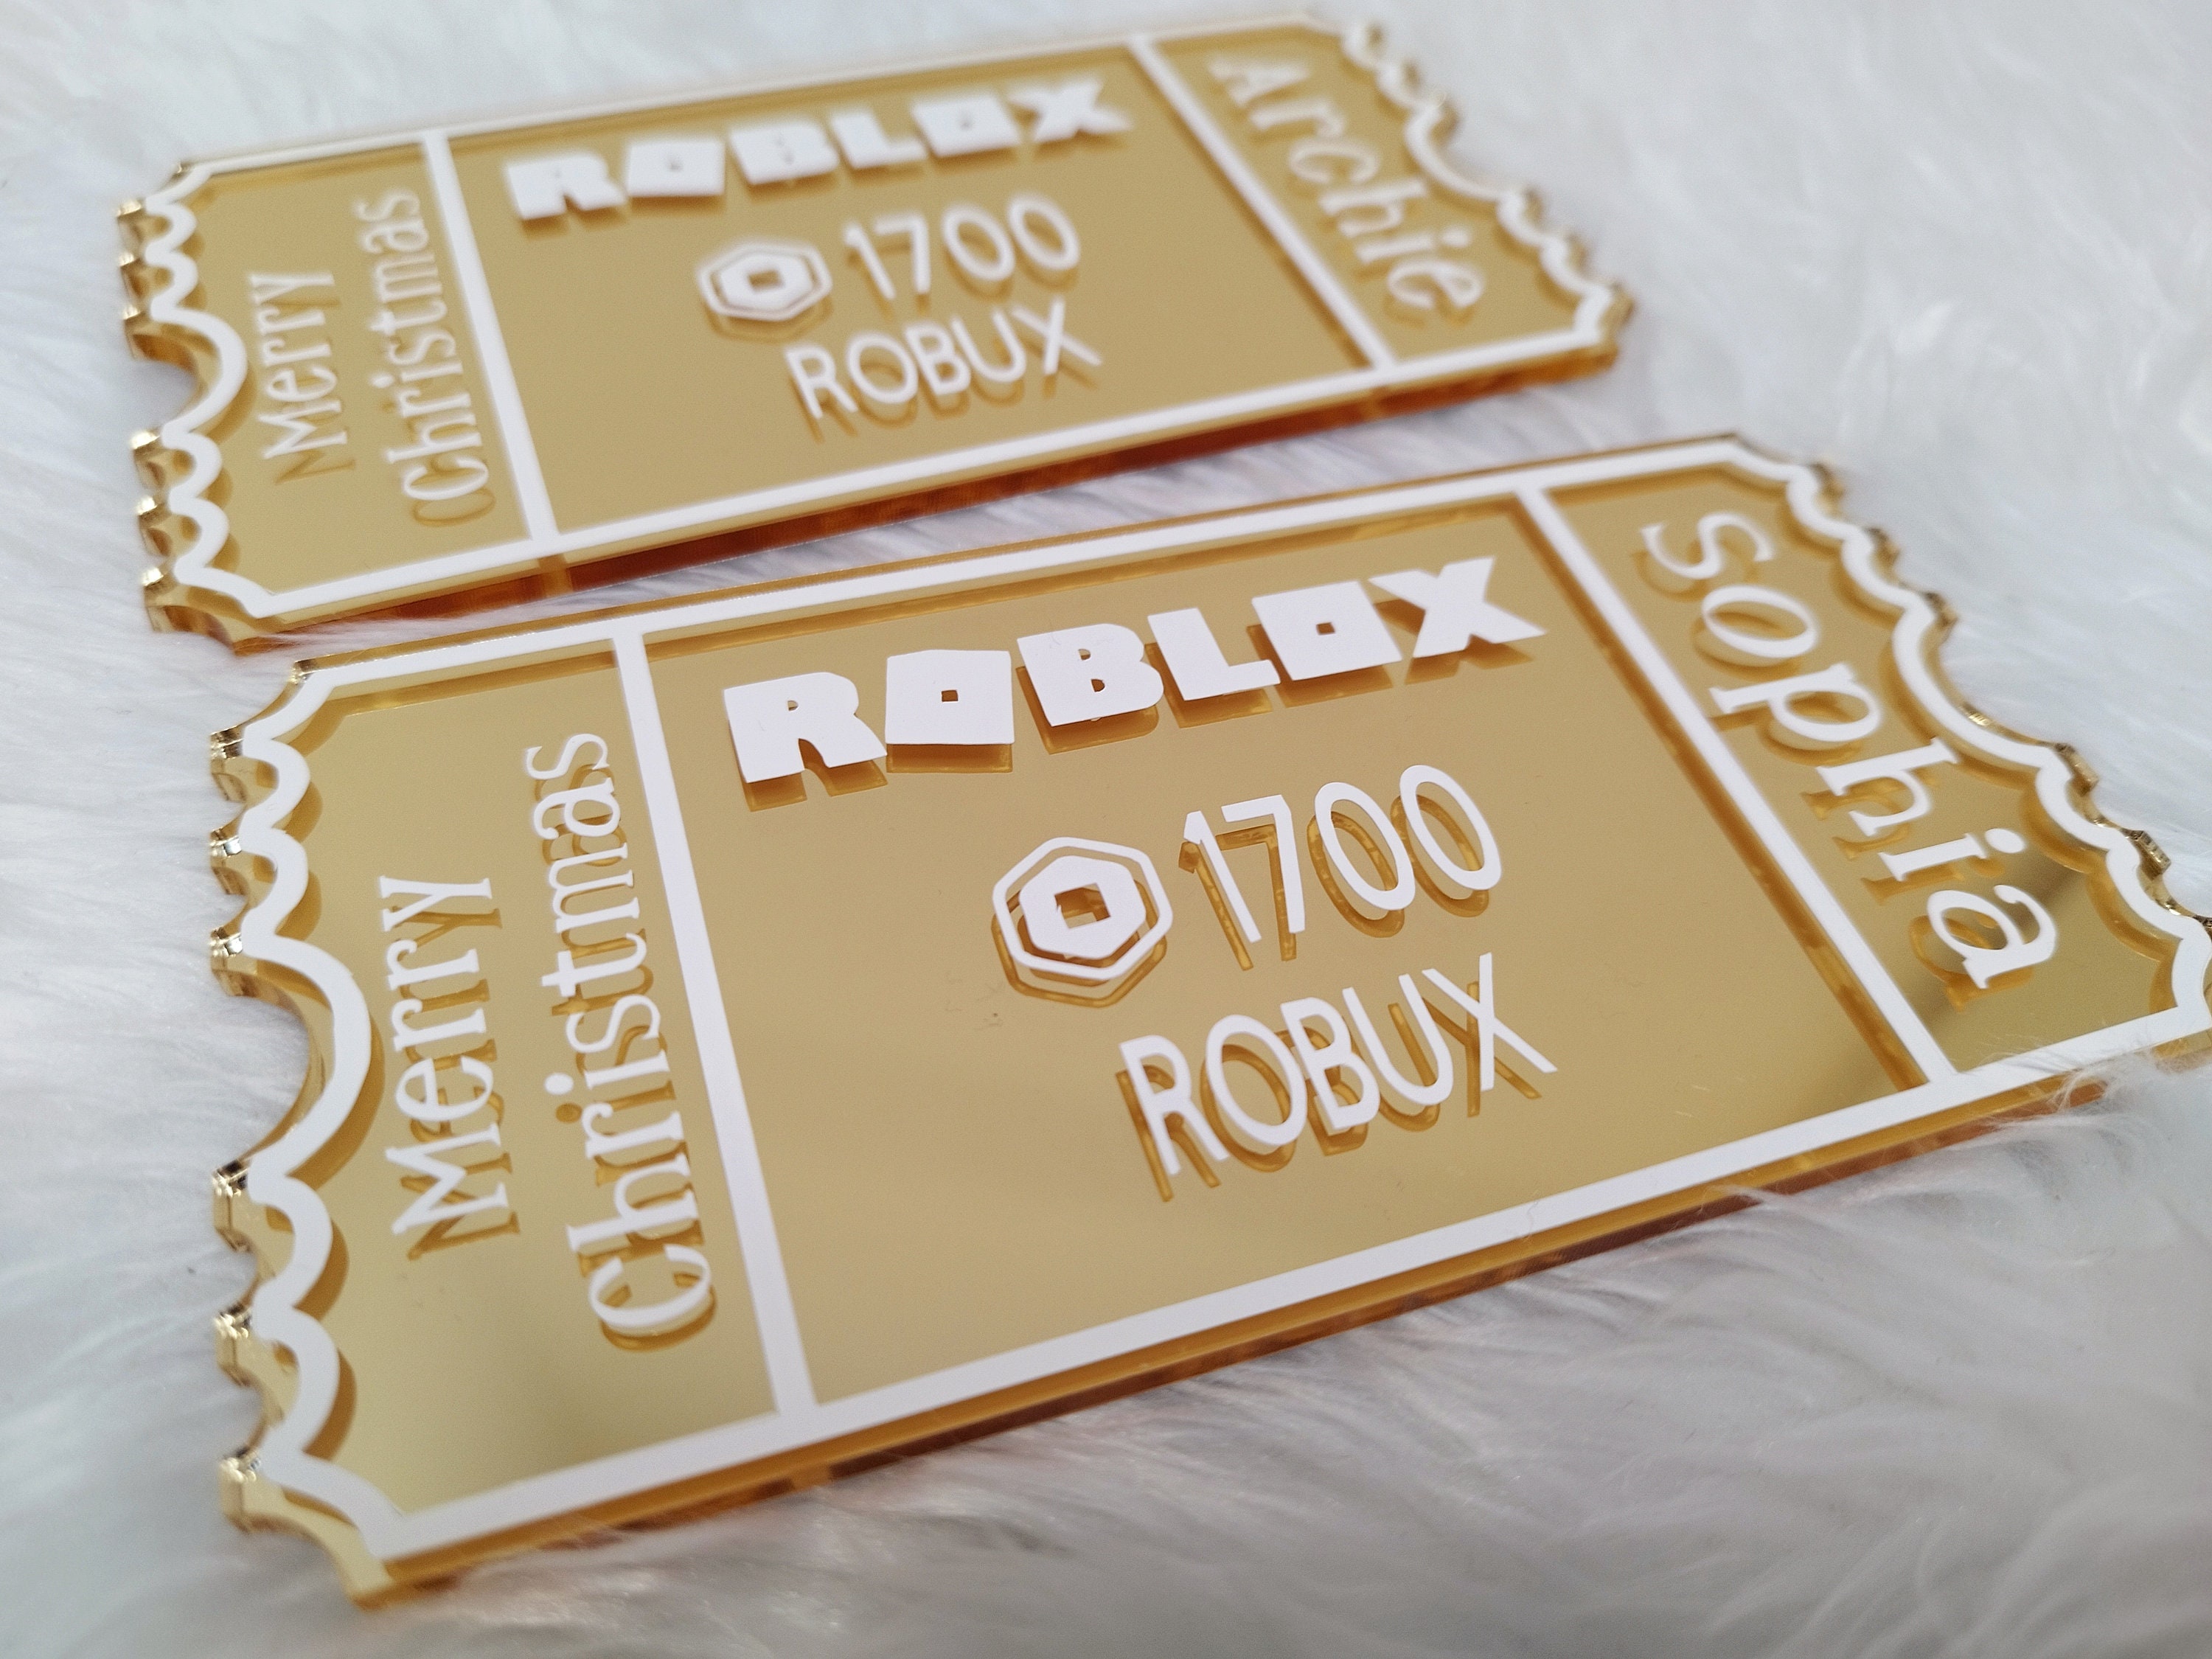 New design for Roblox gift cards! : r/roblox